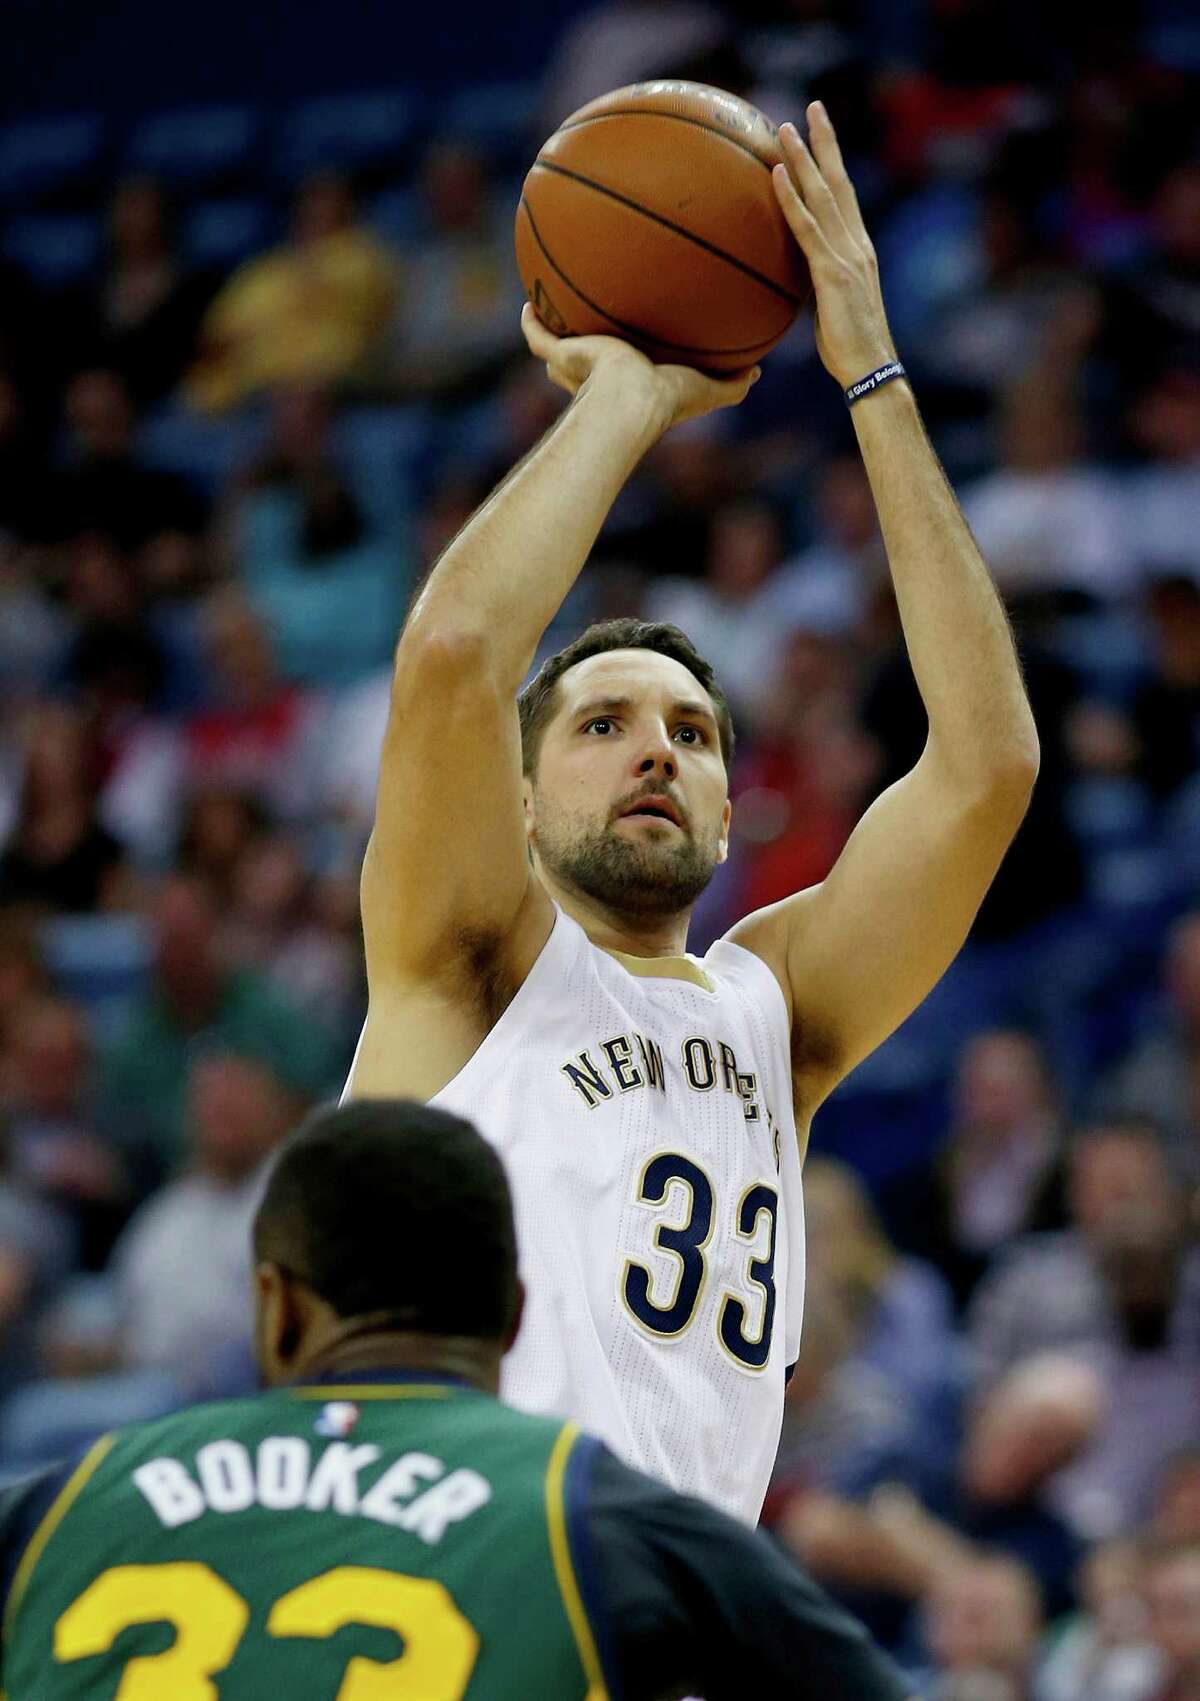 New Orleans Pelicans forward Ryan Anderson (33) shoot a three-point shot over the head of Utah Jazz forward Trevor Booker in the first half of an NBA basketball game in New Orleans, La., Saturday, March 5, 2016. (AP Photo/Max Becherer)